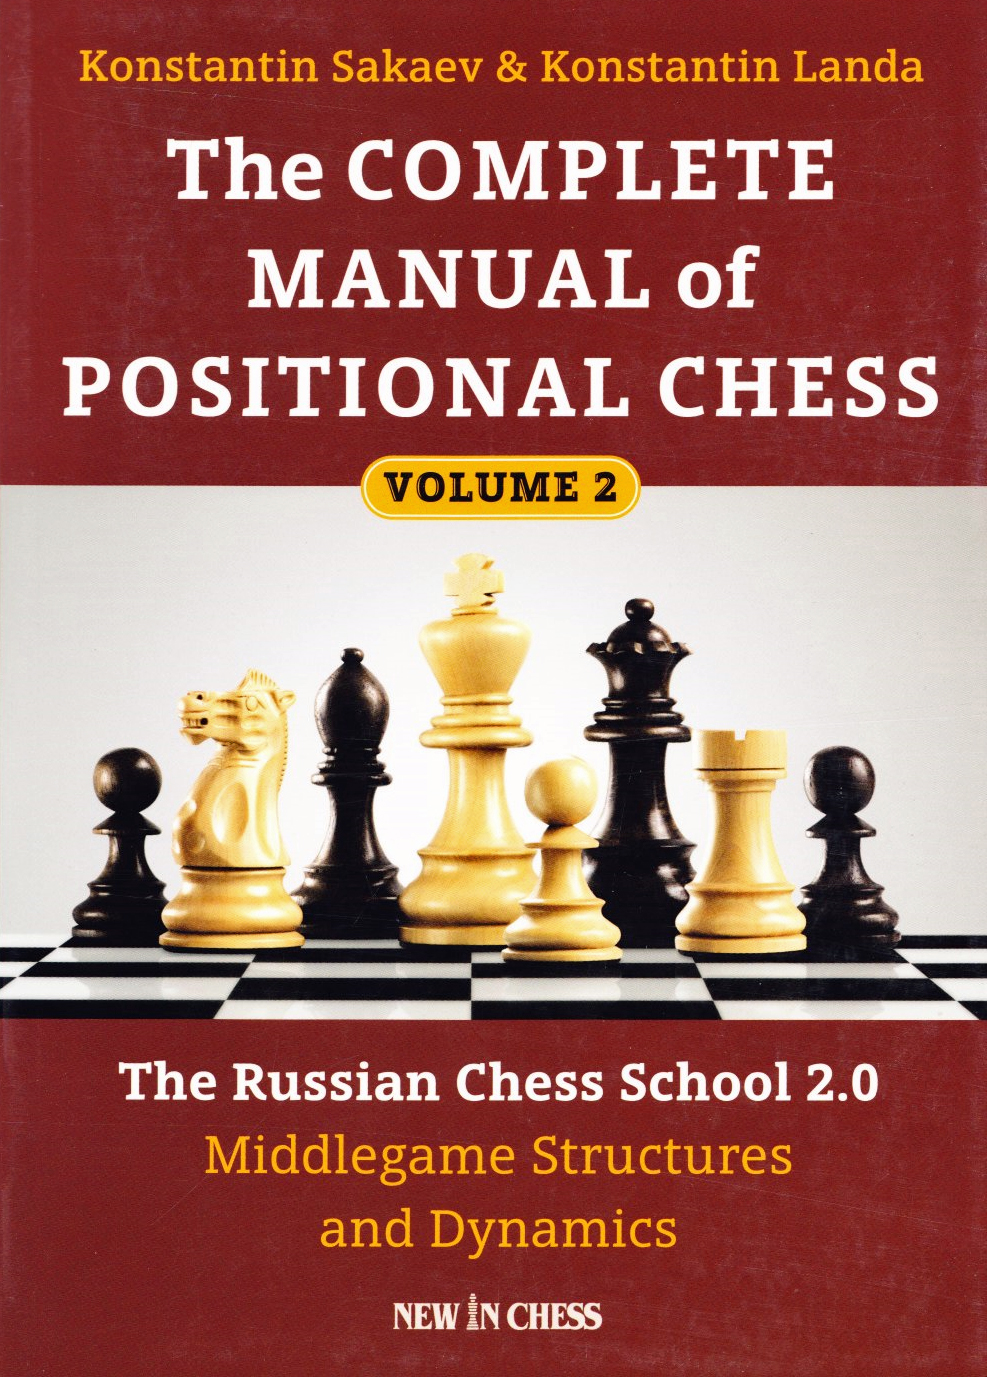 The Complete Manual of Positional Chess Vol. 2